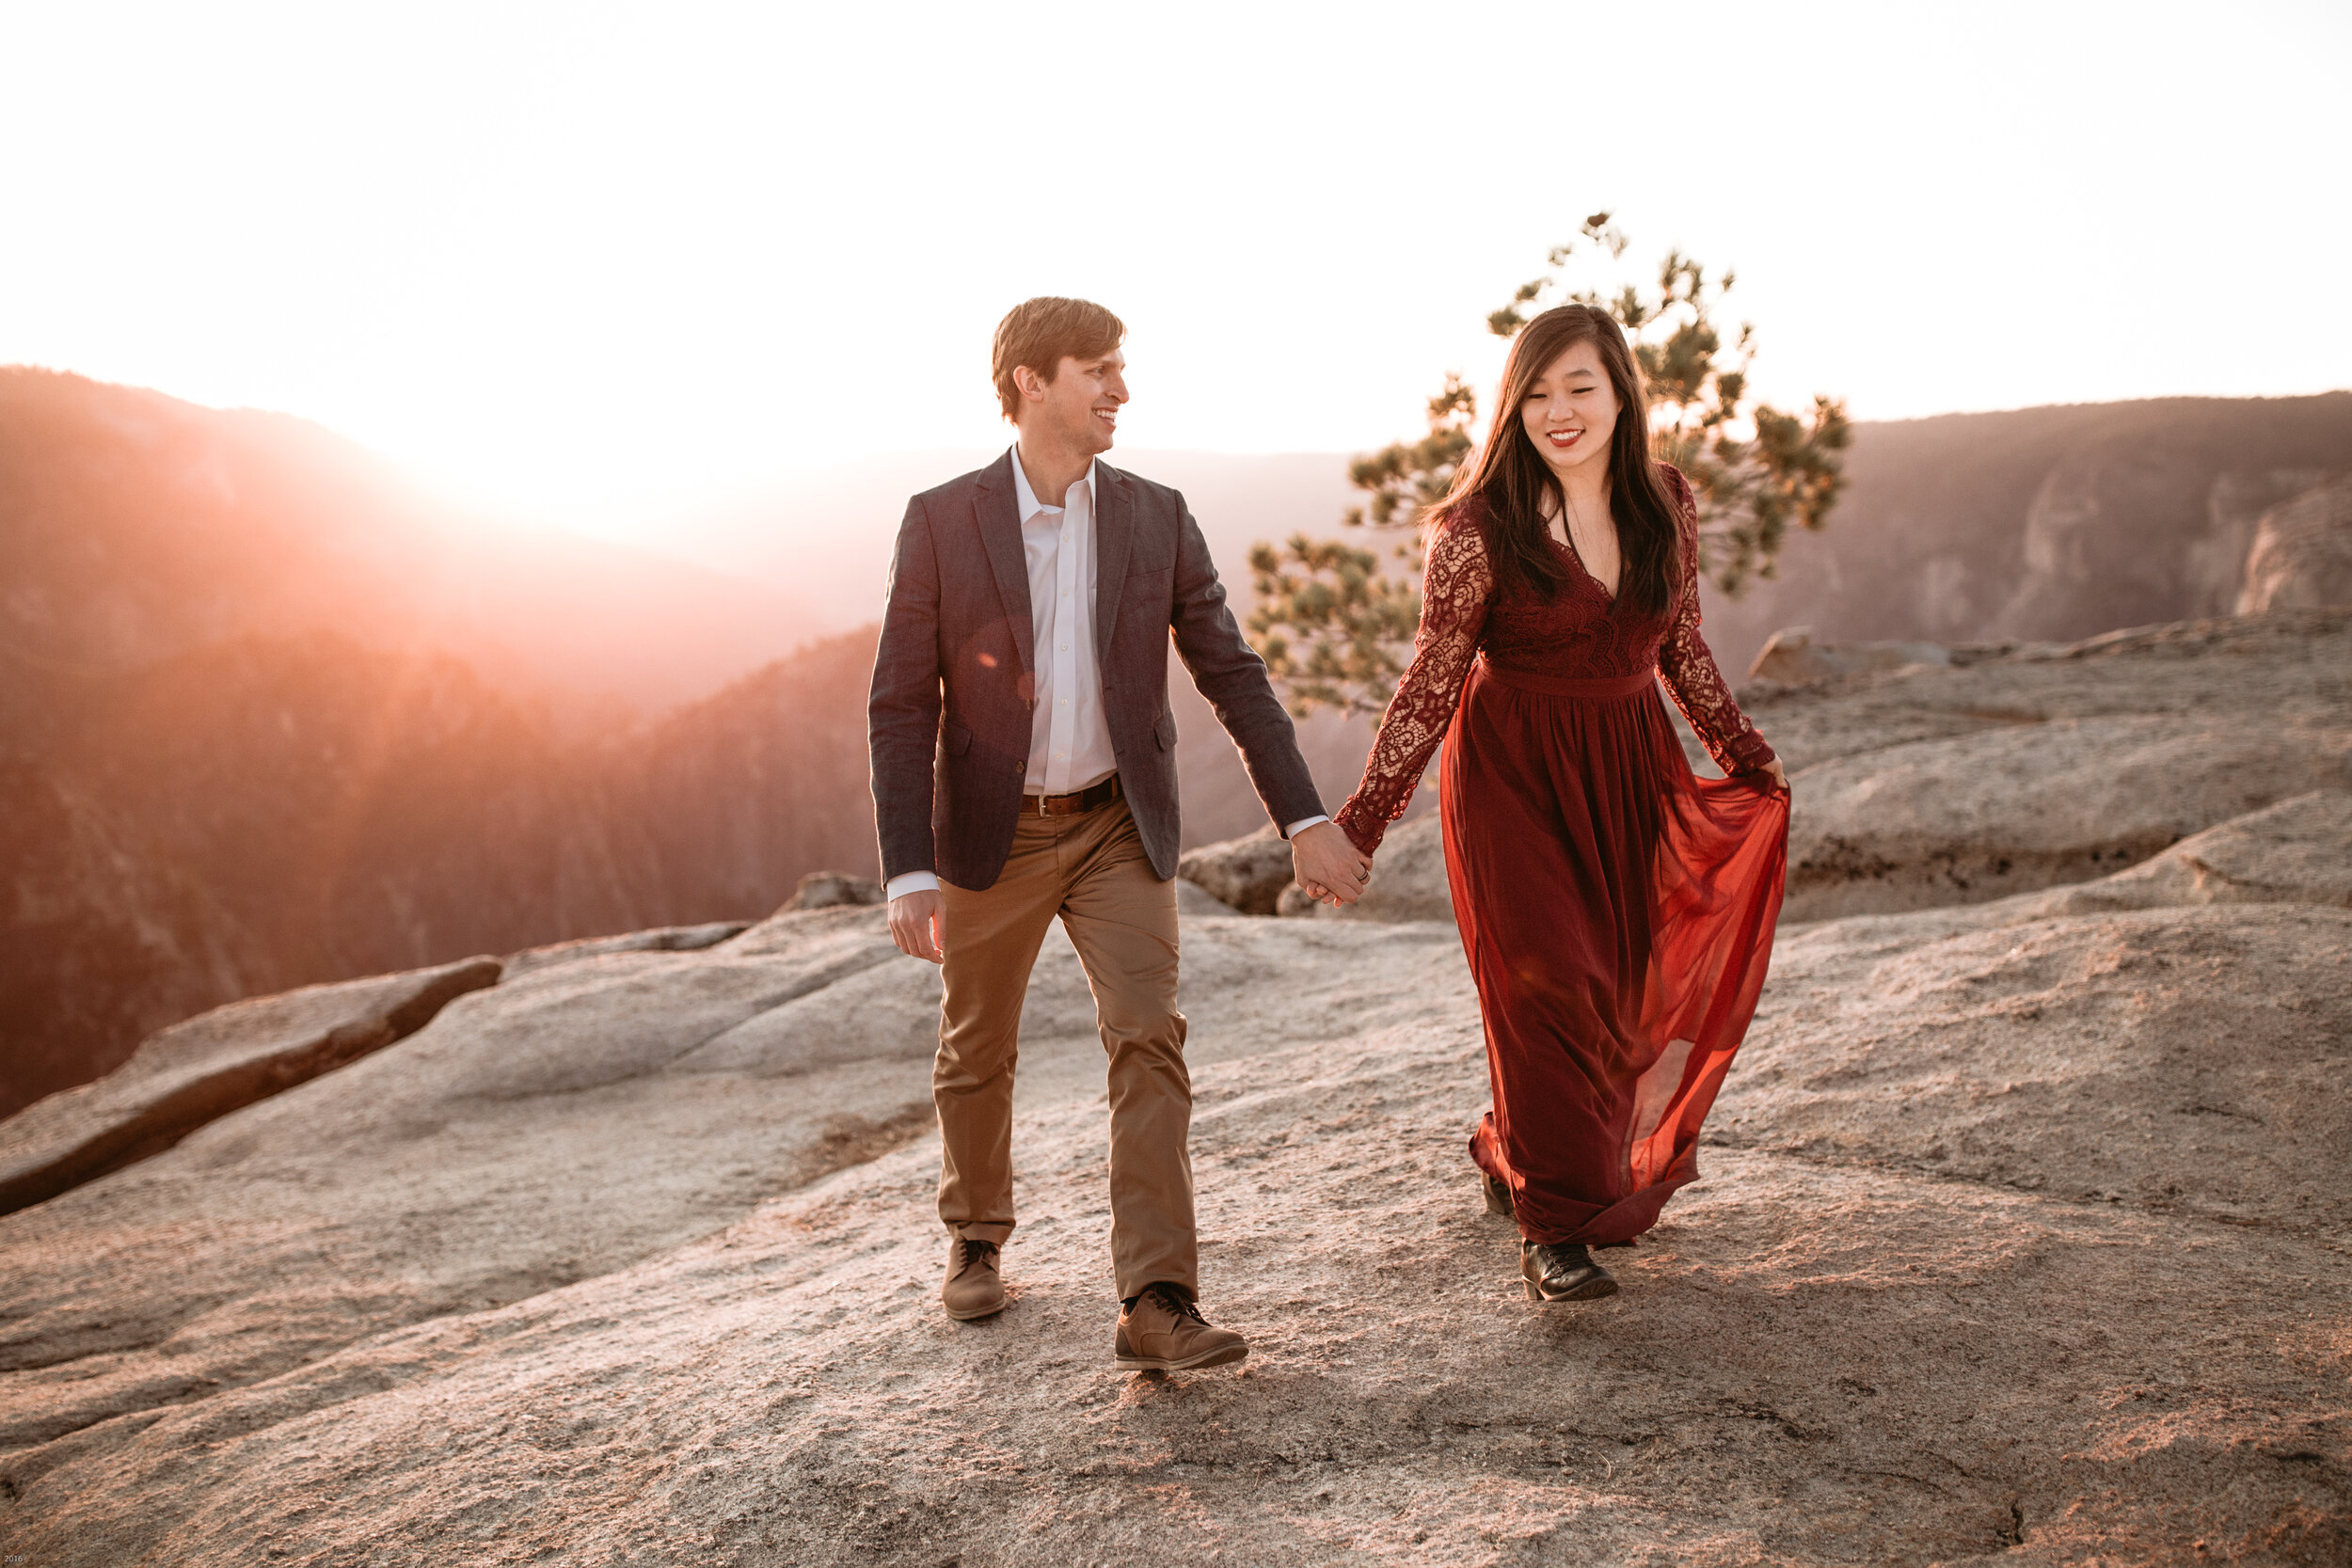 yosemite-national-park-couples-session-at-taft-point-and-yosemite-valley-yosemite-elopement-photographer-nicole-daacke-photography-163.jpg